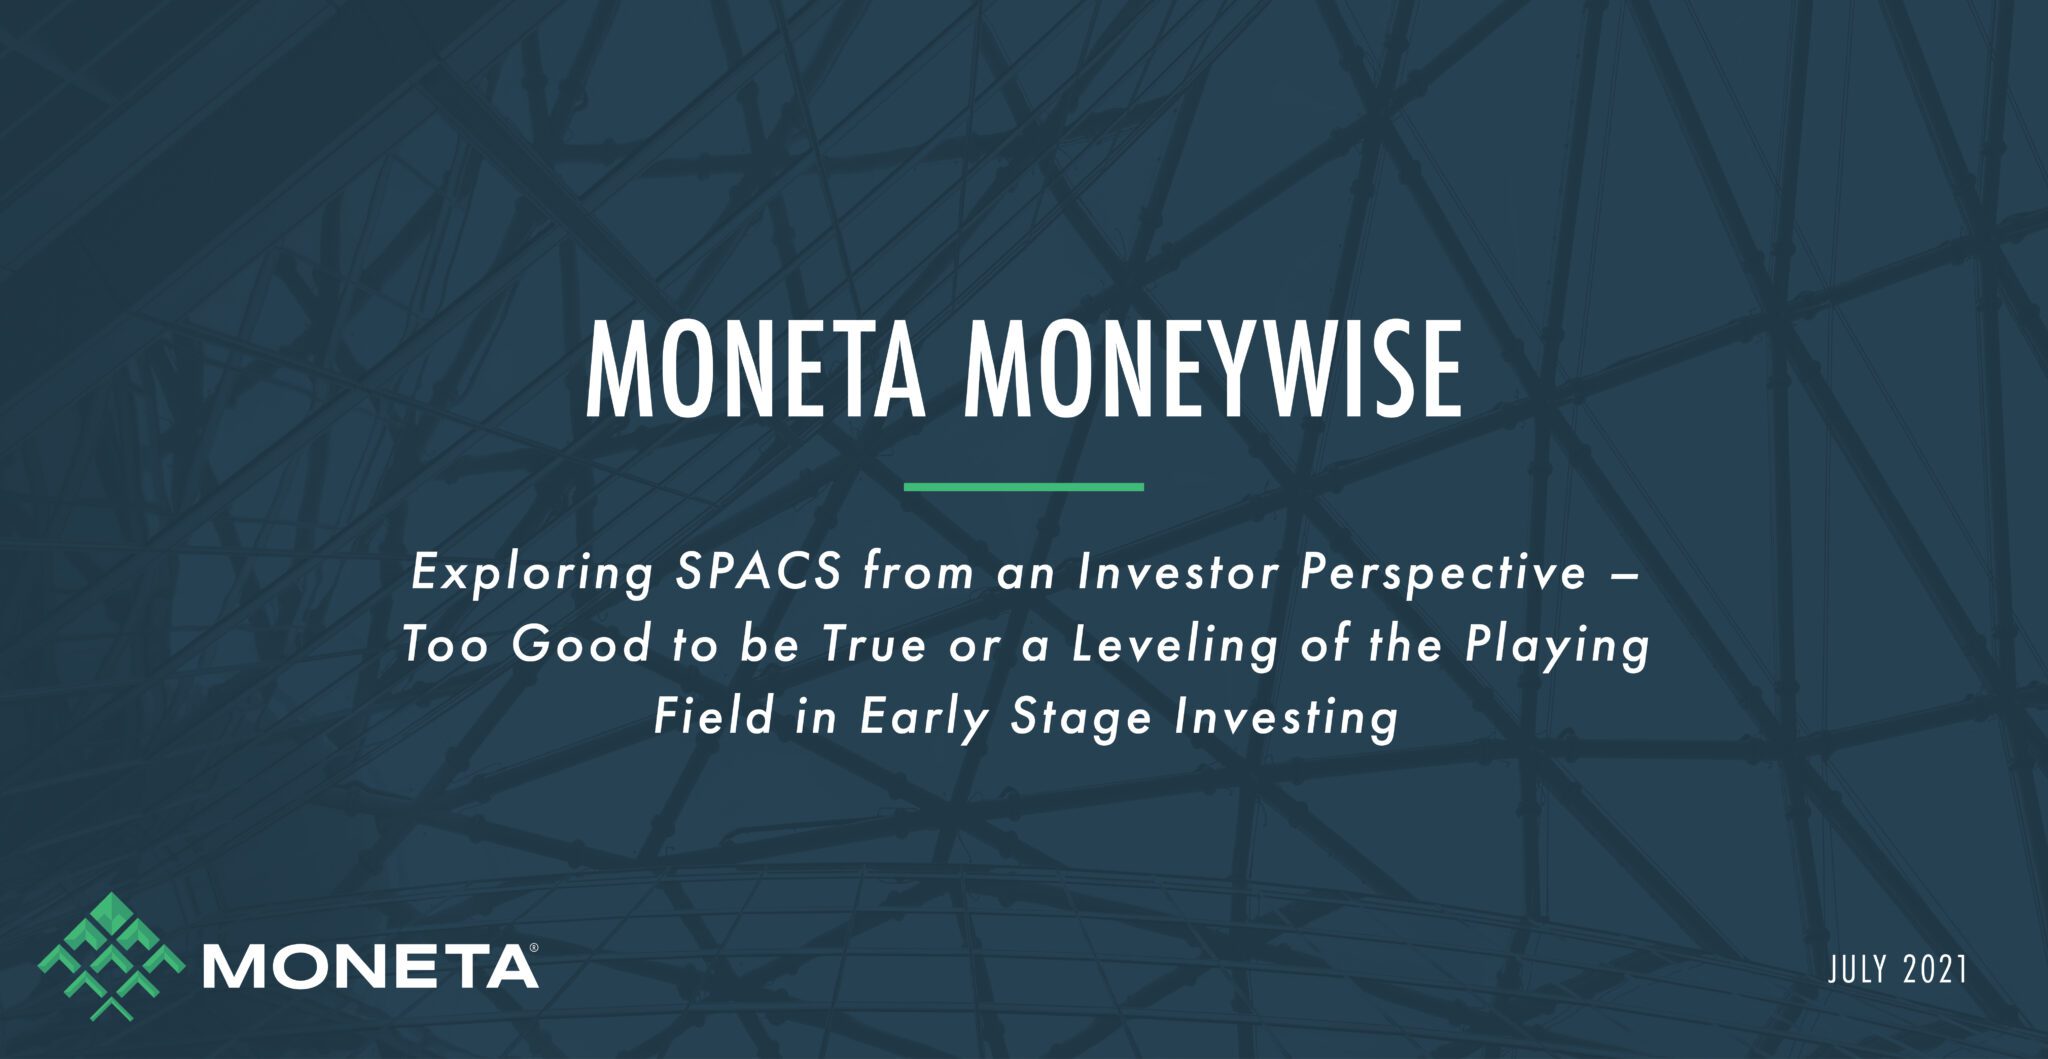 Moneta Moneywise Podcast: Exploring SPACS from an Investor Perspective